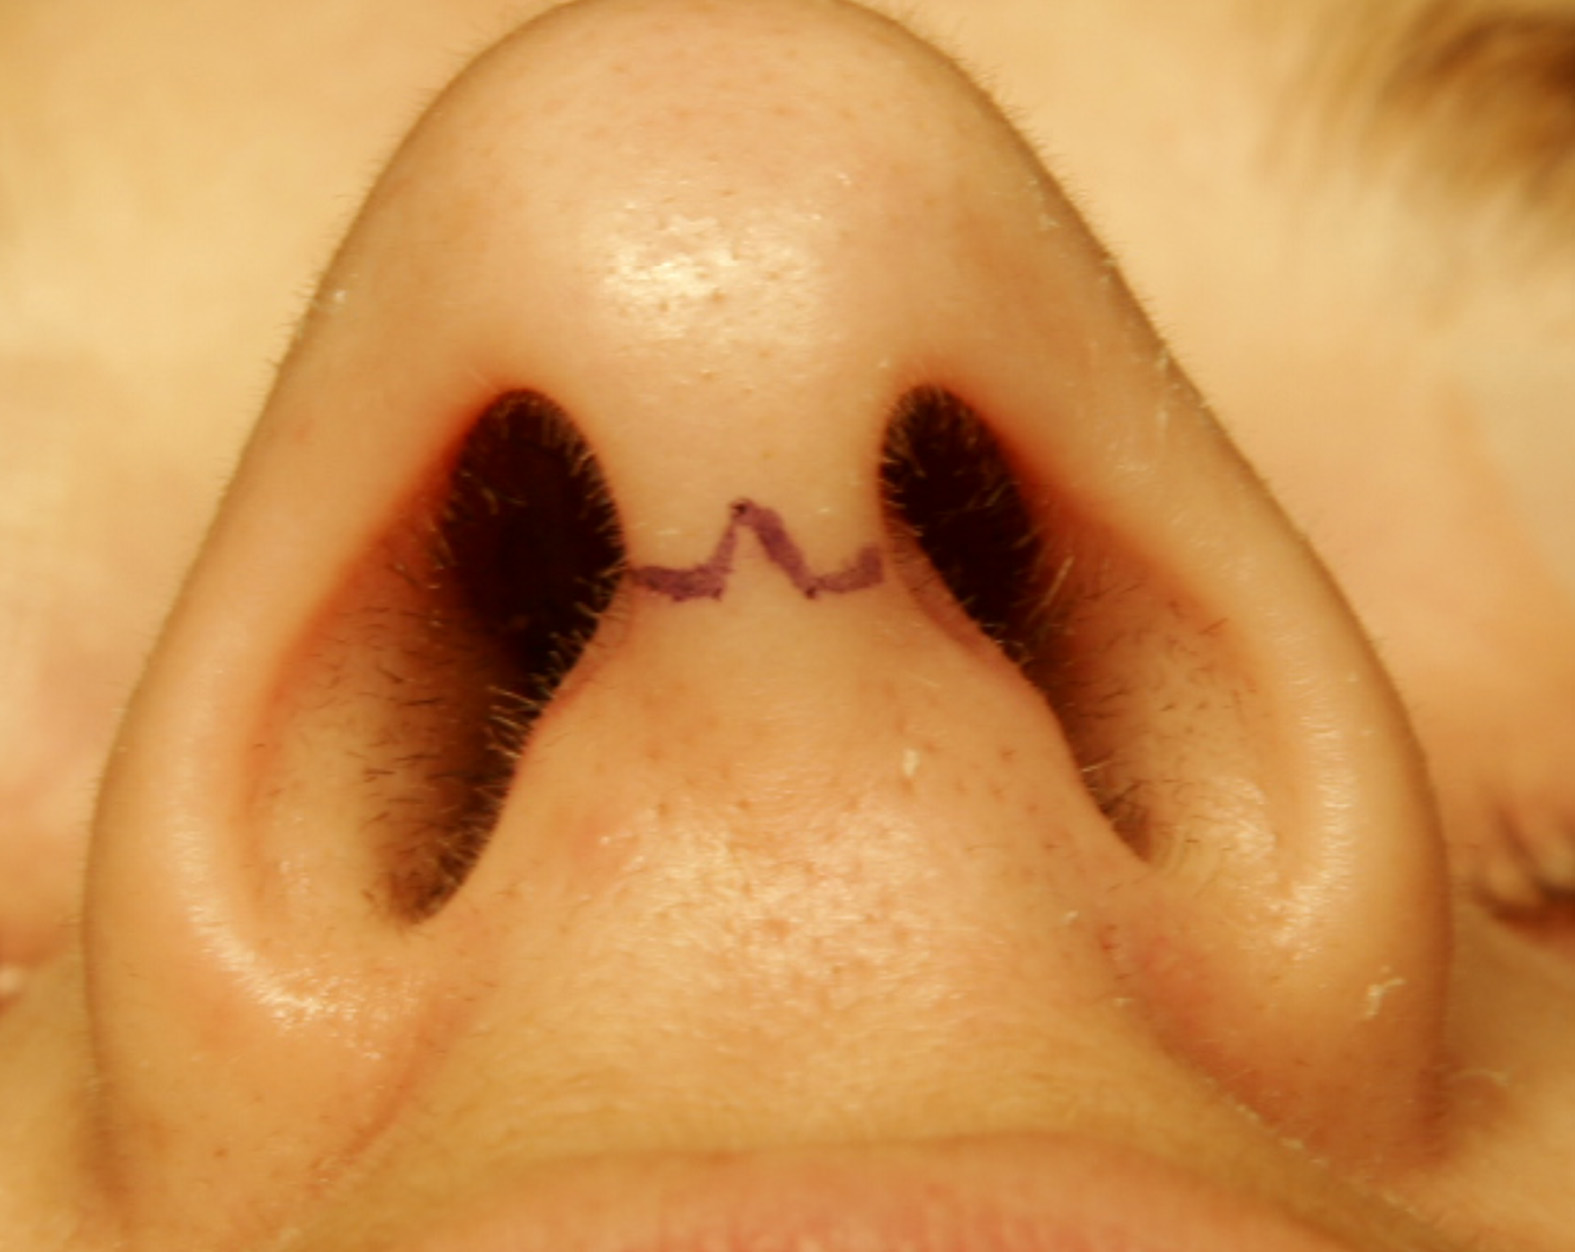 External or open rhinoplasty trans-columellar incision marking right before surgery